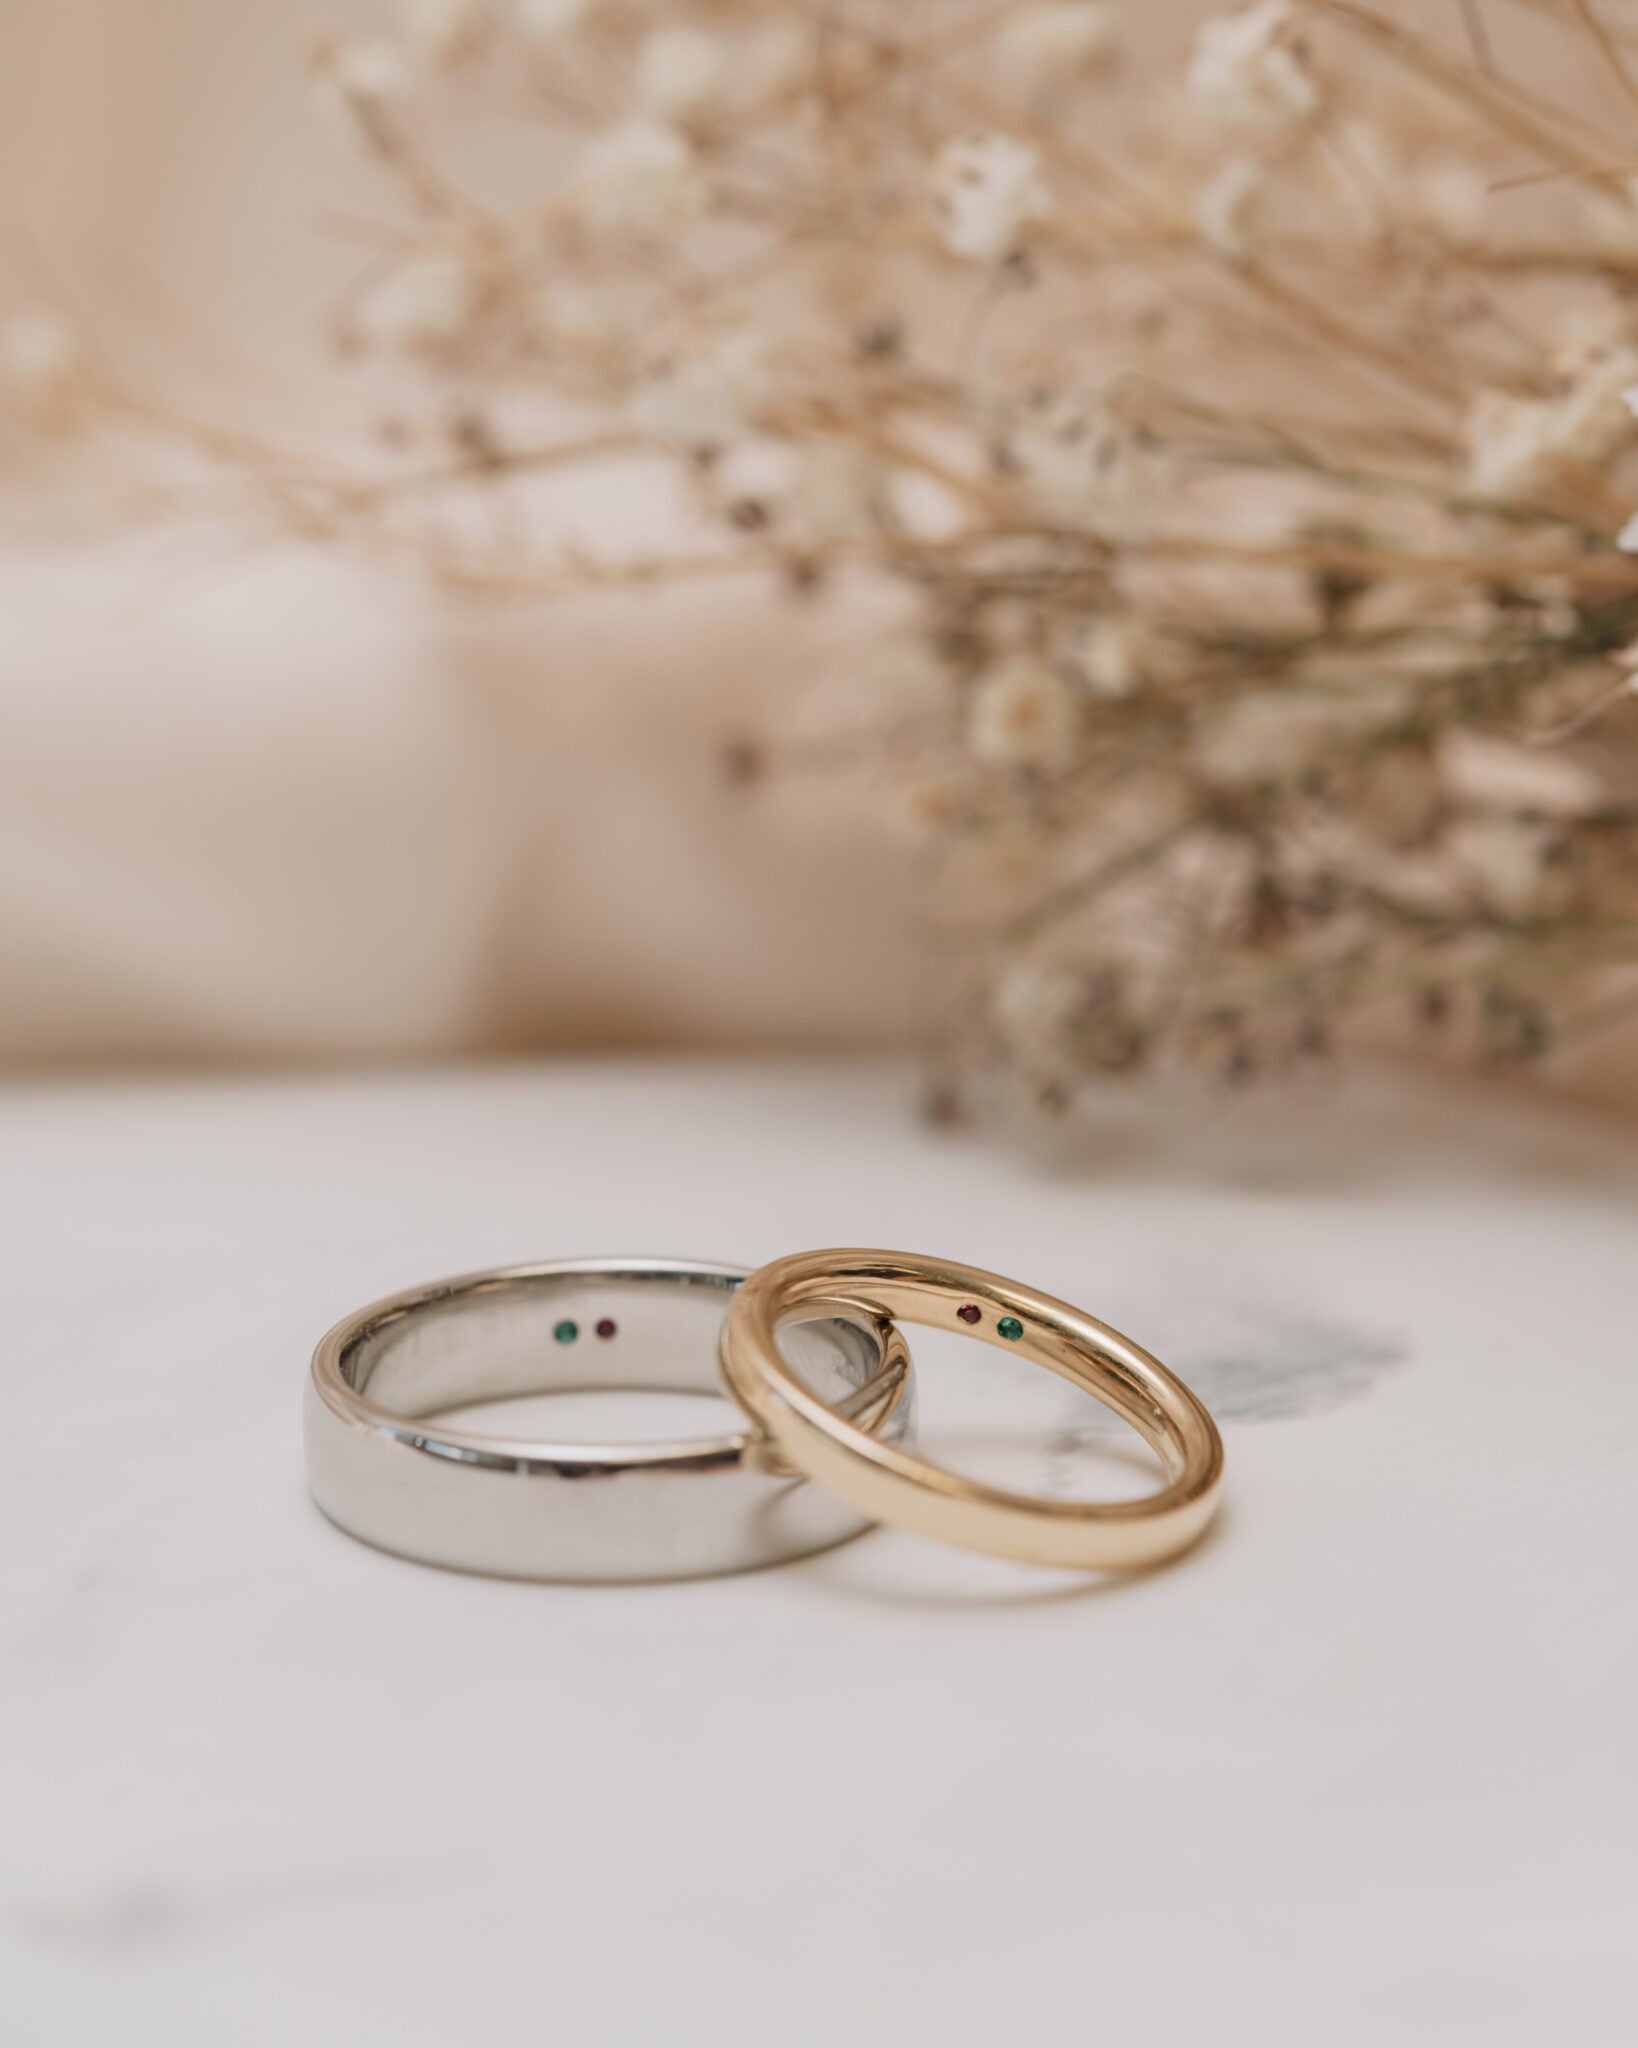 two wedding rings resting on a plain white surface with flowers in the background and small gemstones set on the inside of the bands